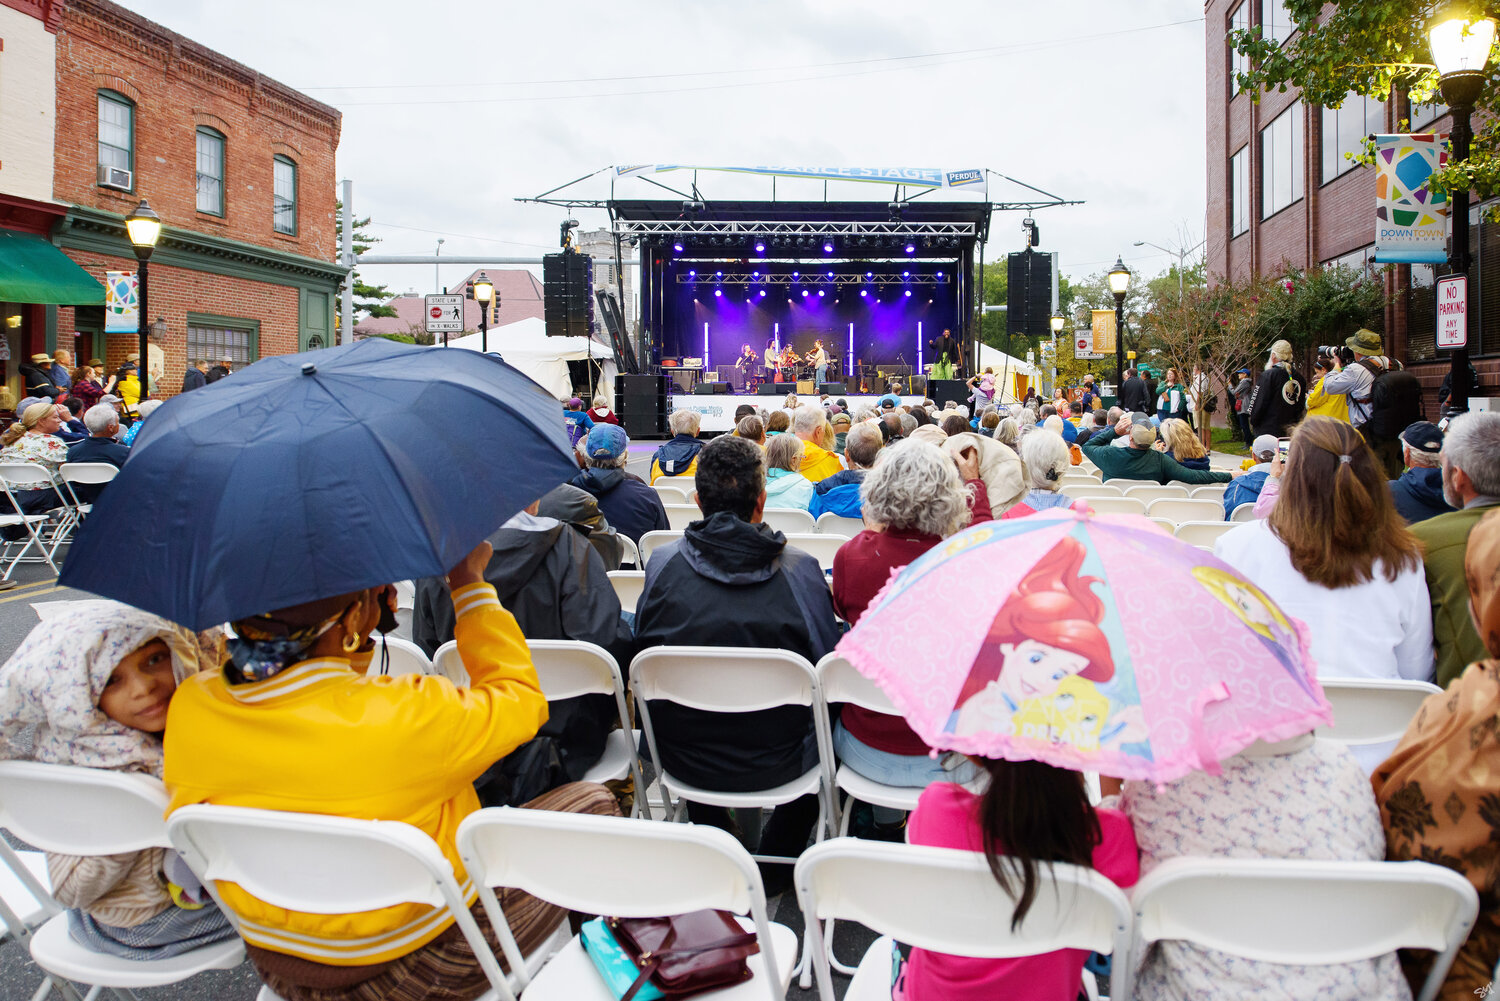 Rain hampered the opening performances of Friday's Maryland Folk Festival opening in Downtown Salisbury. Saturday's events were a washout, thanks to Tropical Storm Ophelia, but the event continued Sunday. See more photos, Pages 7 through 11. SMDI Photography